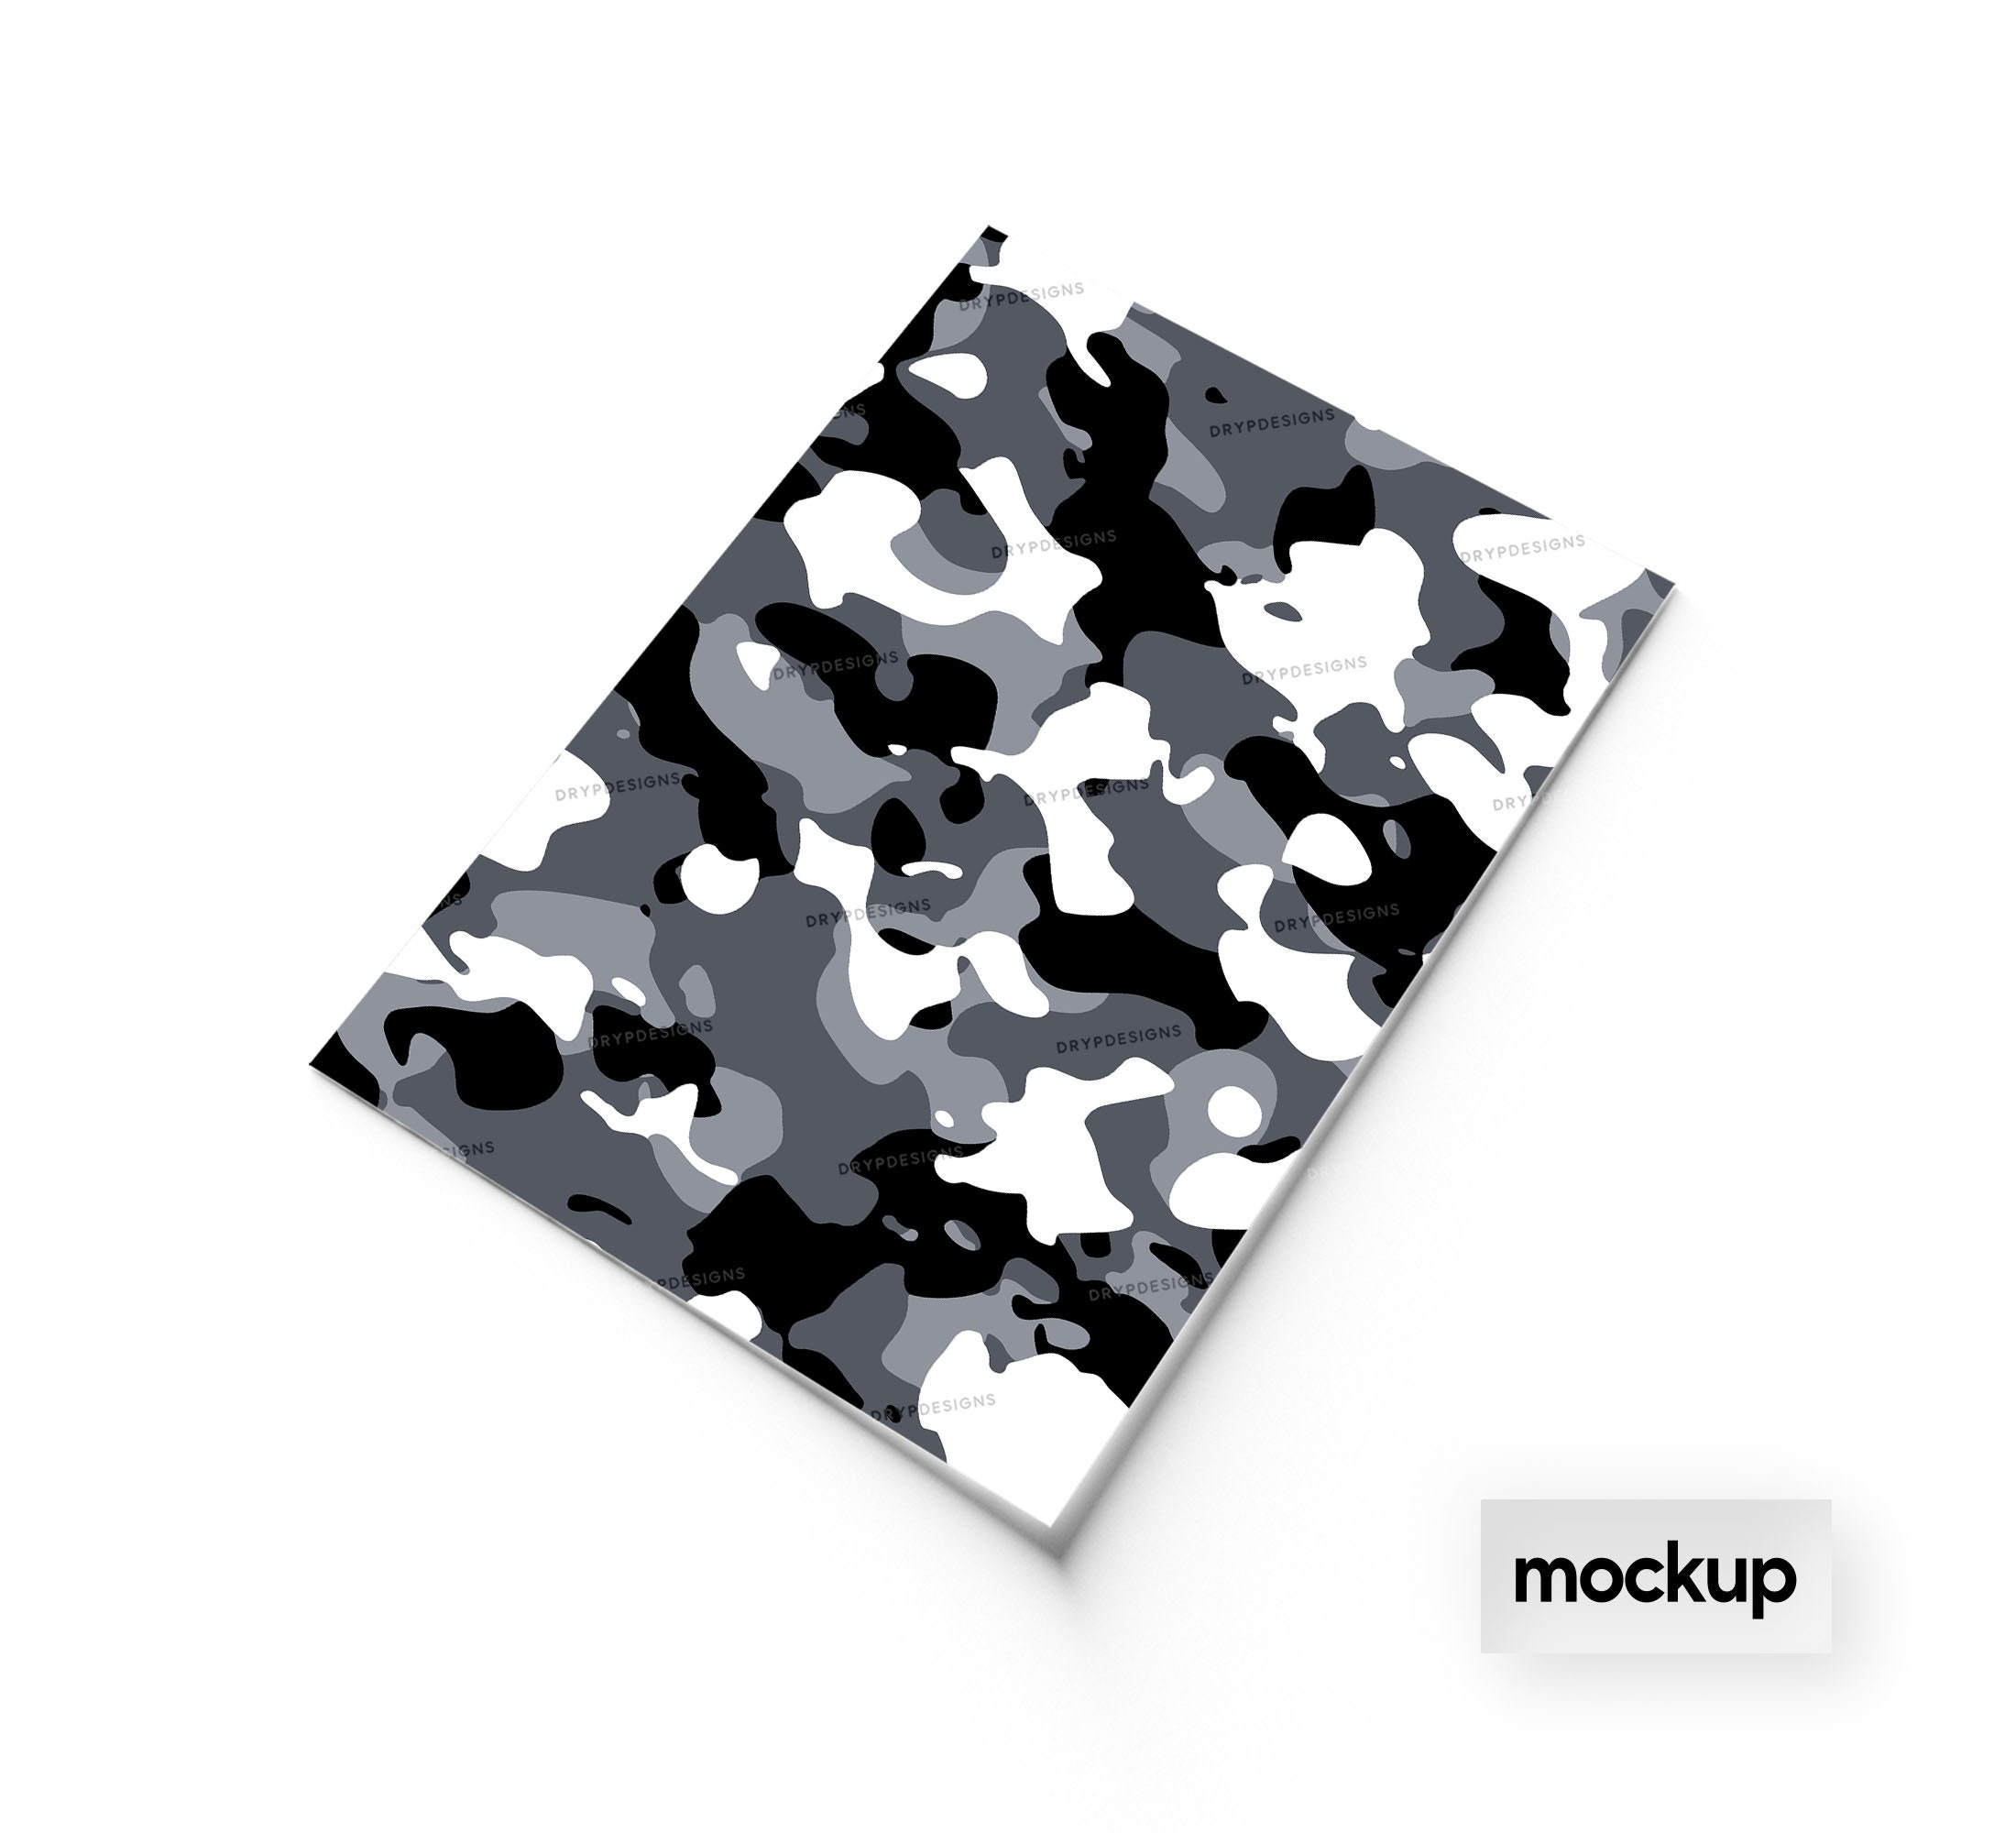 Army Camo Digital Seamless Patterns in Grey and Black Photographic Print  for Sale by ShopieHome